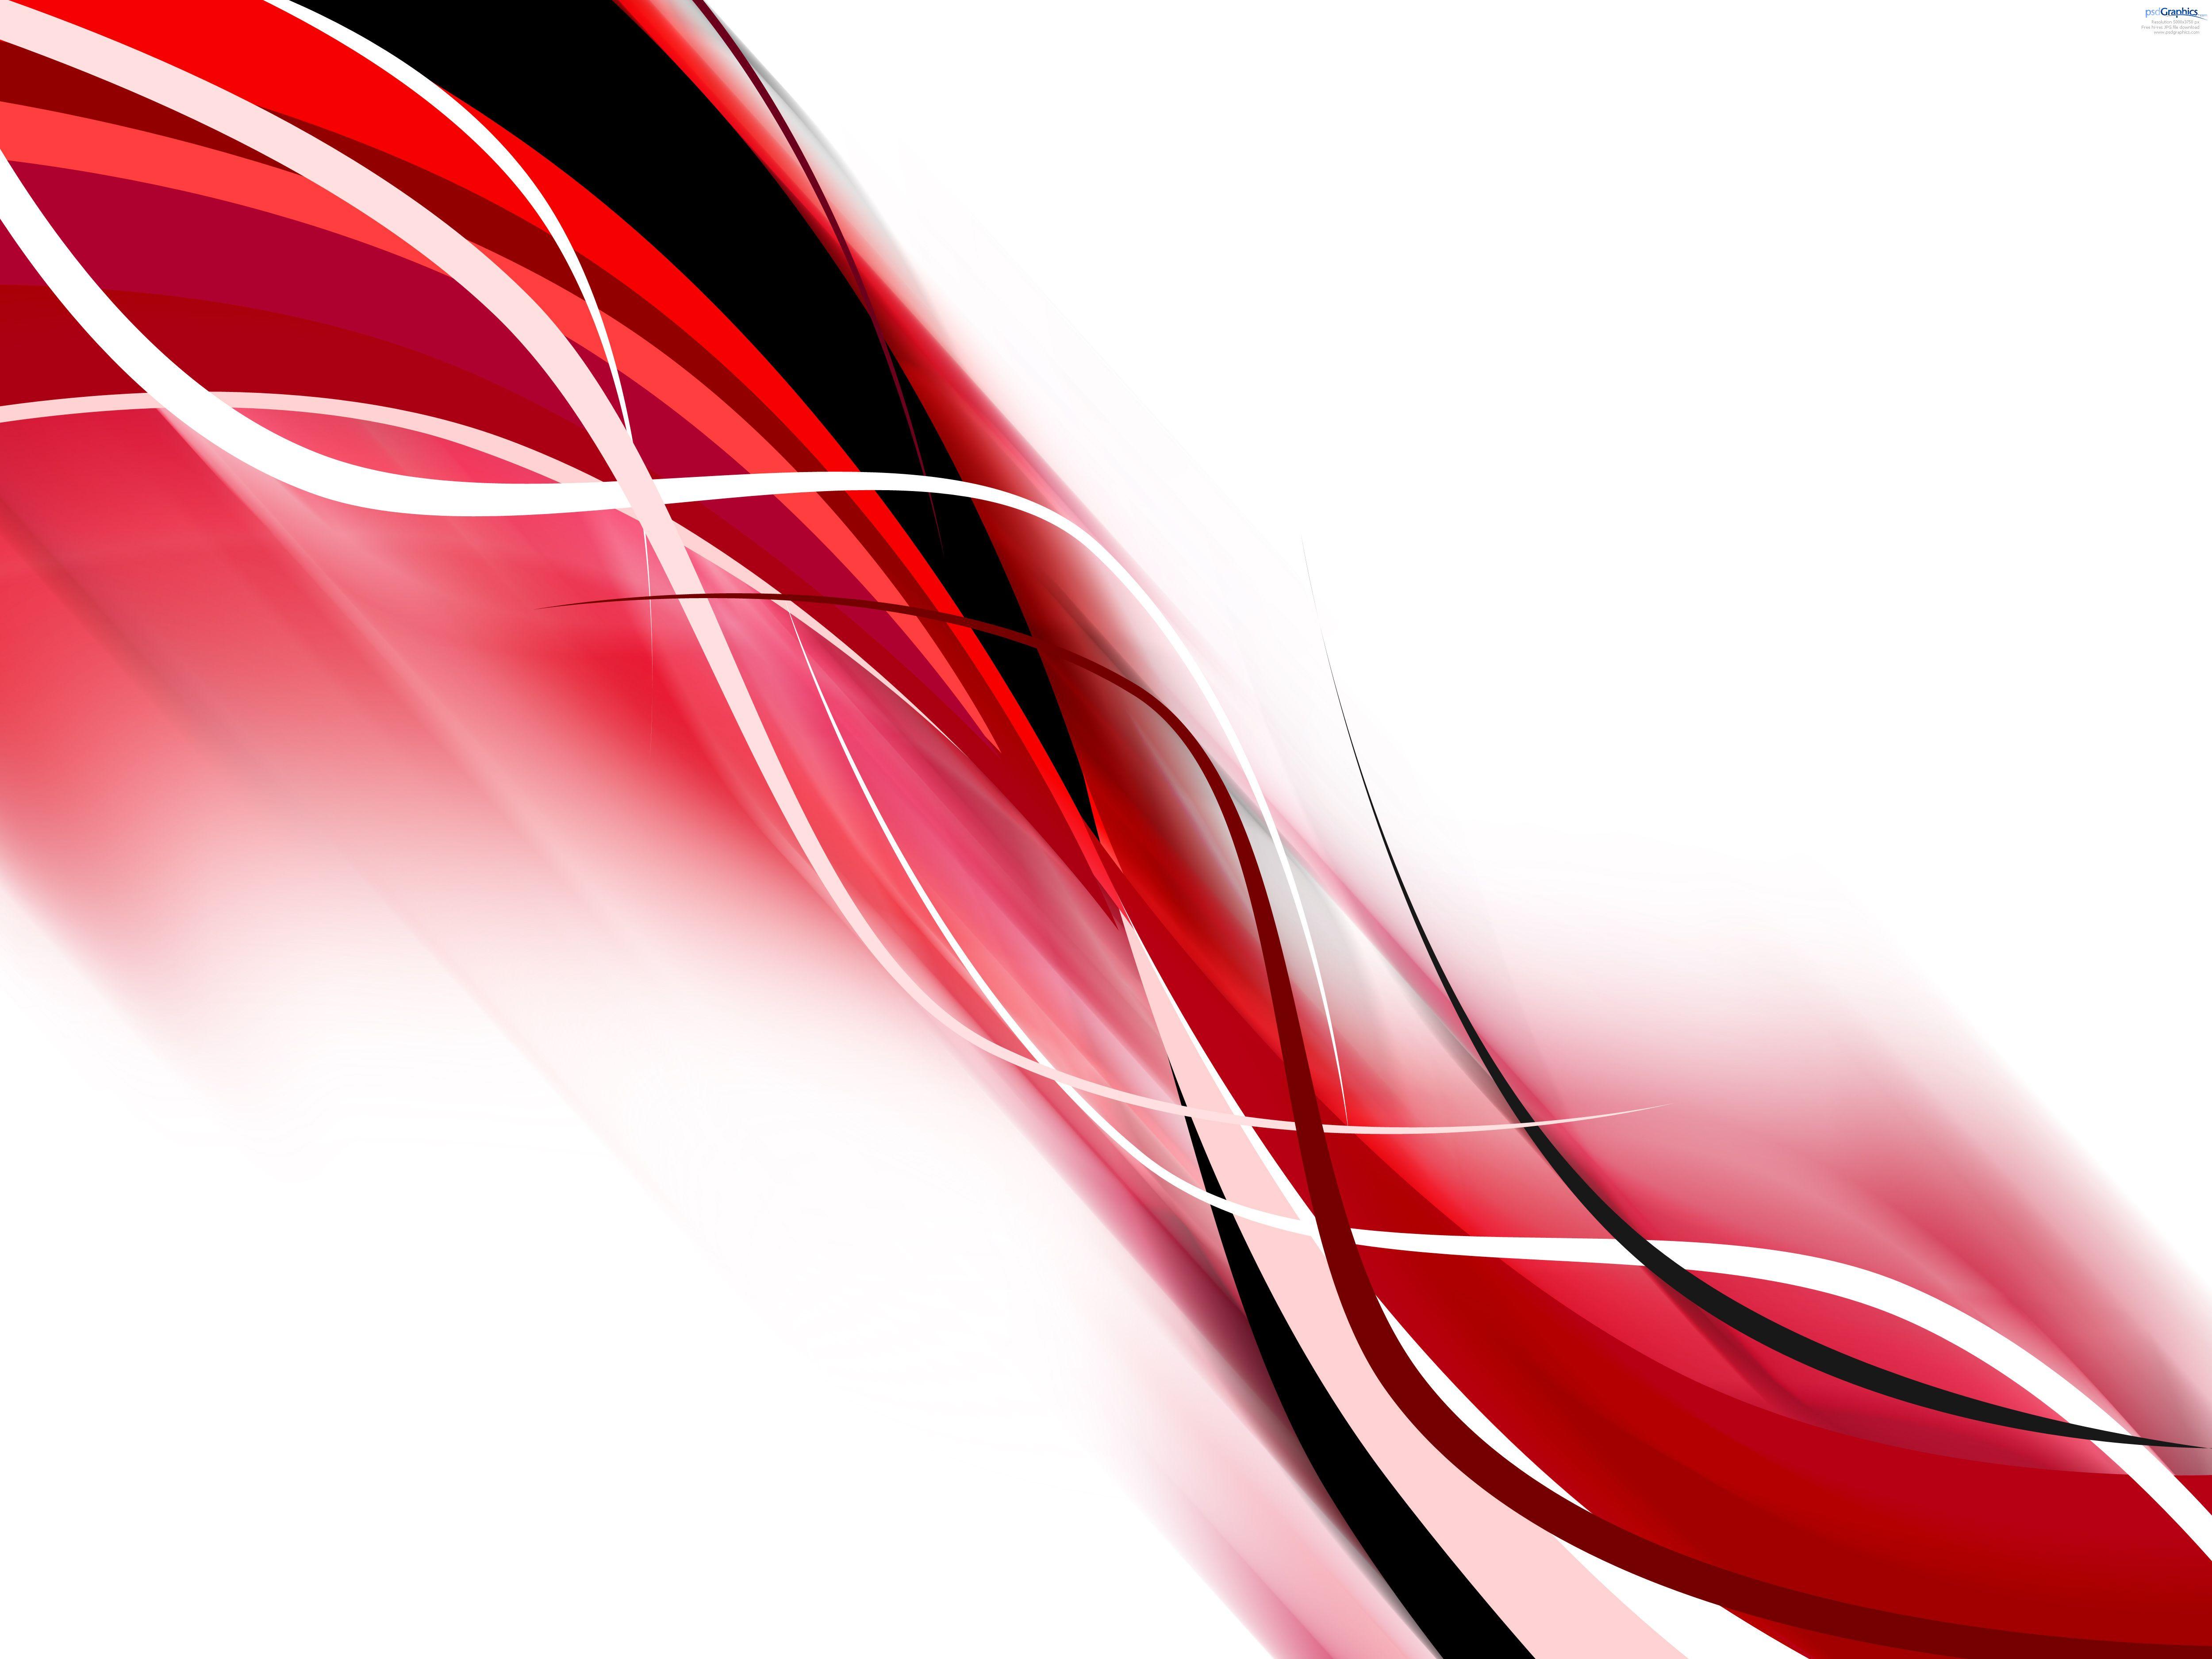 Black and White with Red Background Logo - Red graphics